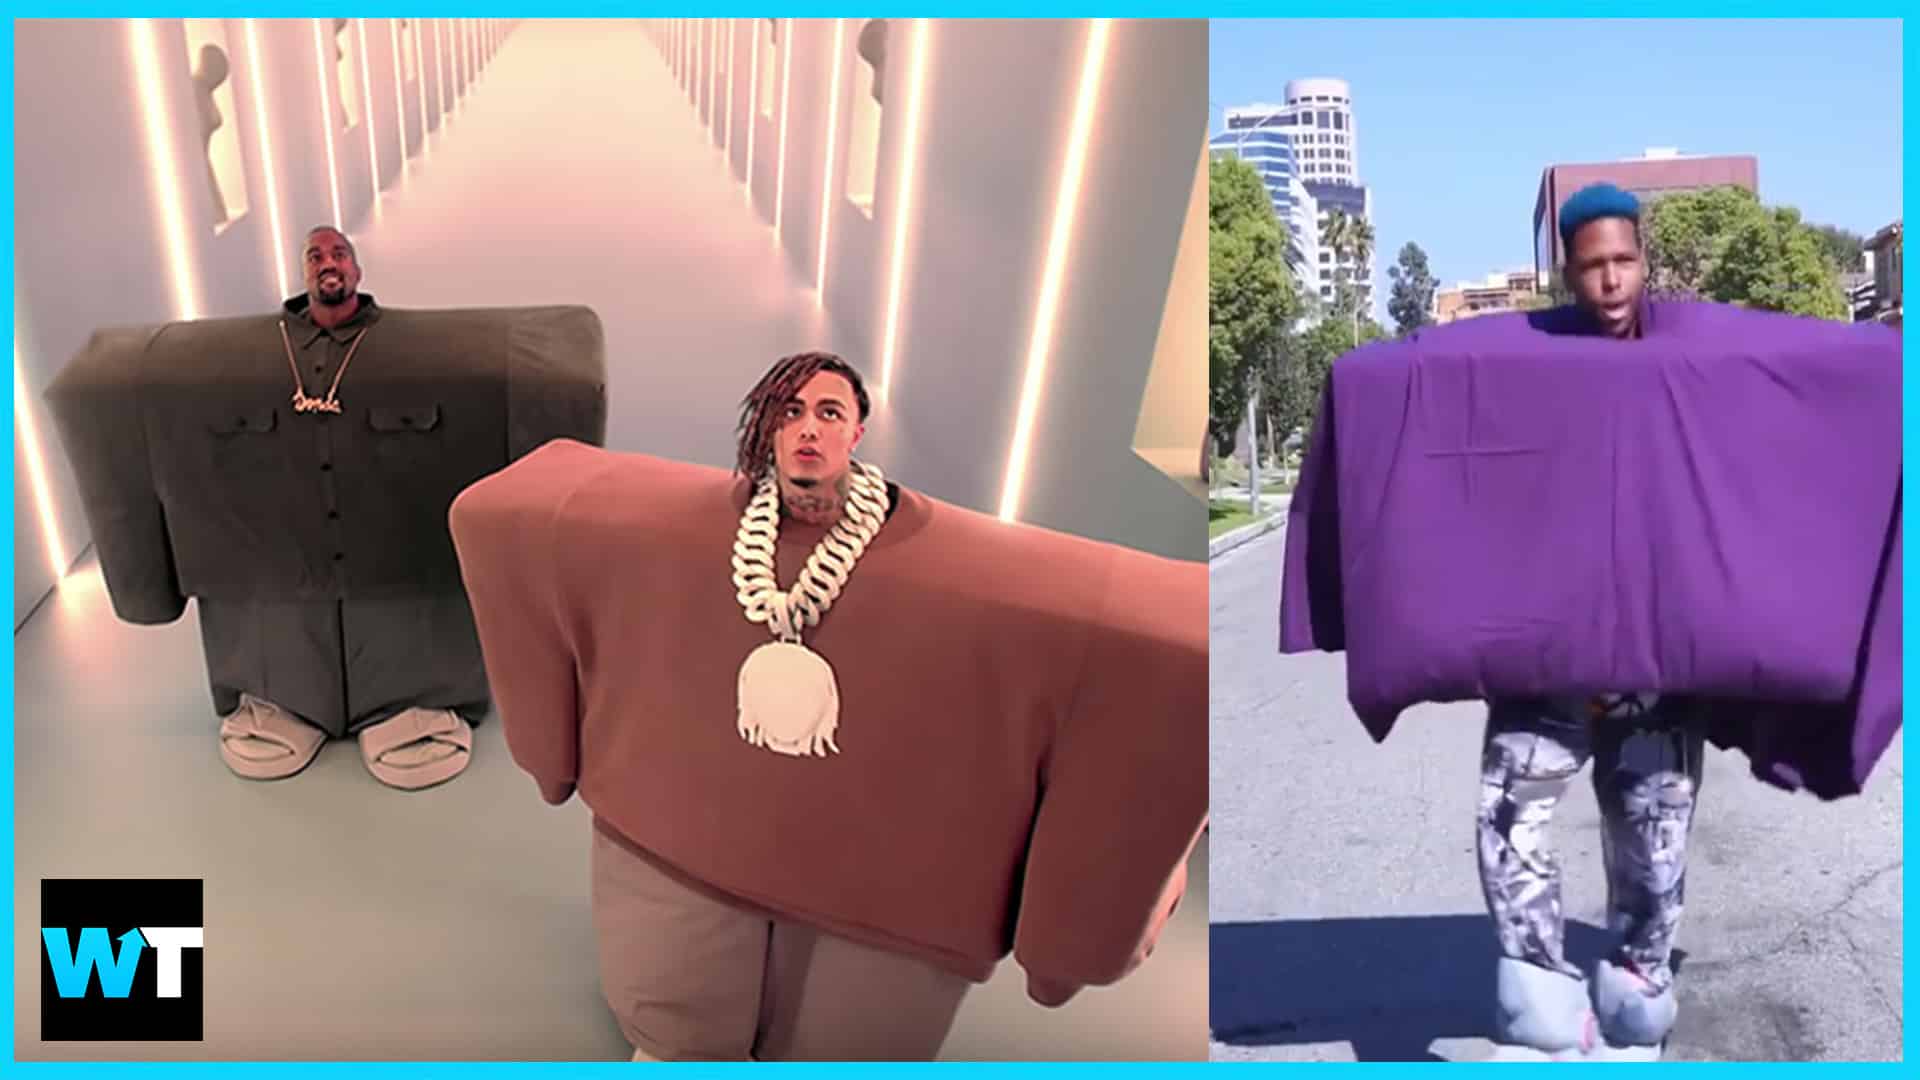 Kanye West And Lil Pump Inspire The Iloveitchallenge - kanye west lil pump roblox i love it video how did we